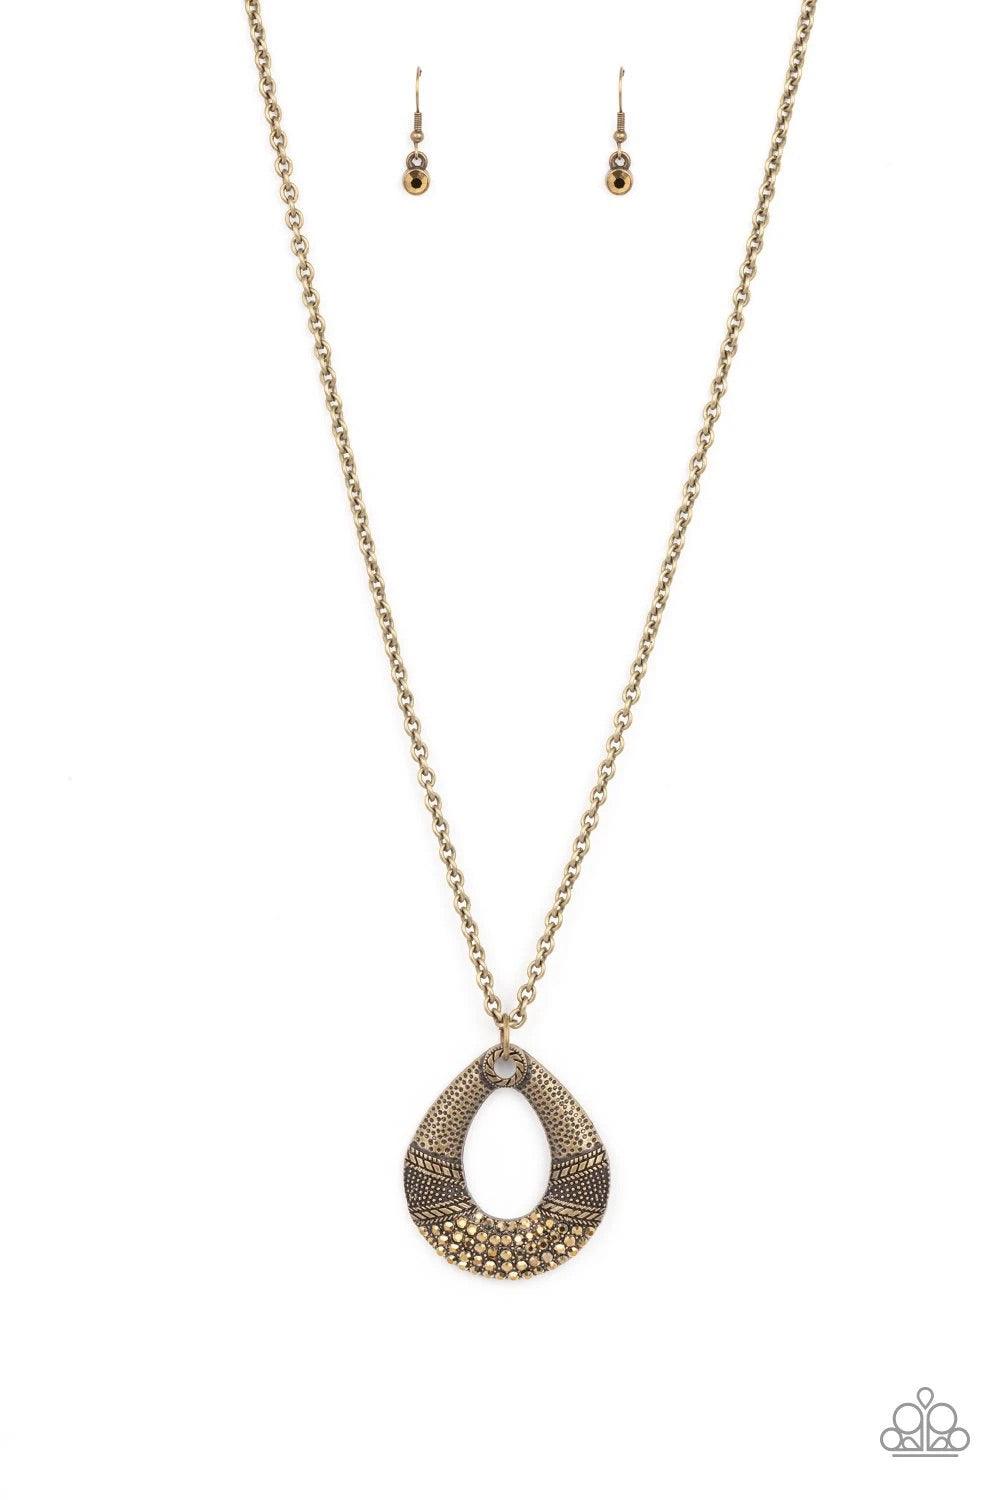 Paparazzi Accessories Glitz and Grind - Brass Studded and embossed in bands of texture, the bottom of a hammered brass teardrop is encrusted in golden topaz rhinestones, creating a glitzy pendant at the bottom of a lengthened brass chain. Features an adju